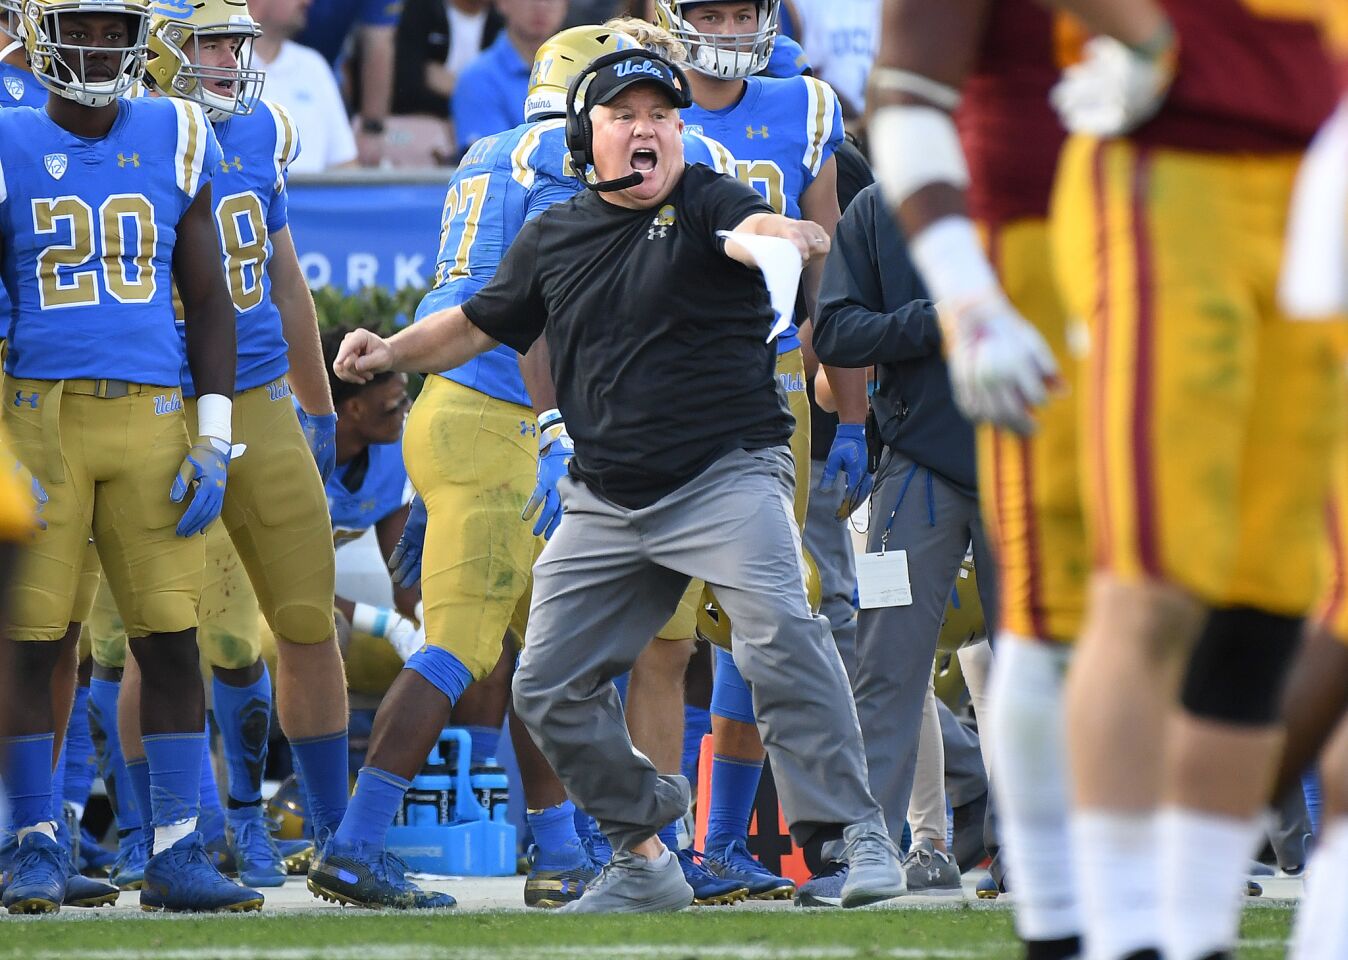 Bruins head coach Chip Kelly fires up his team against USC at the Rose Bowl on Saturday.